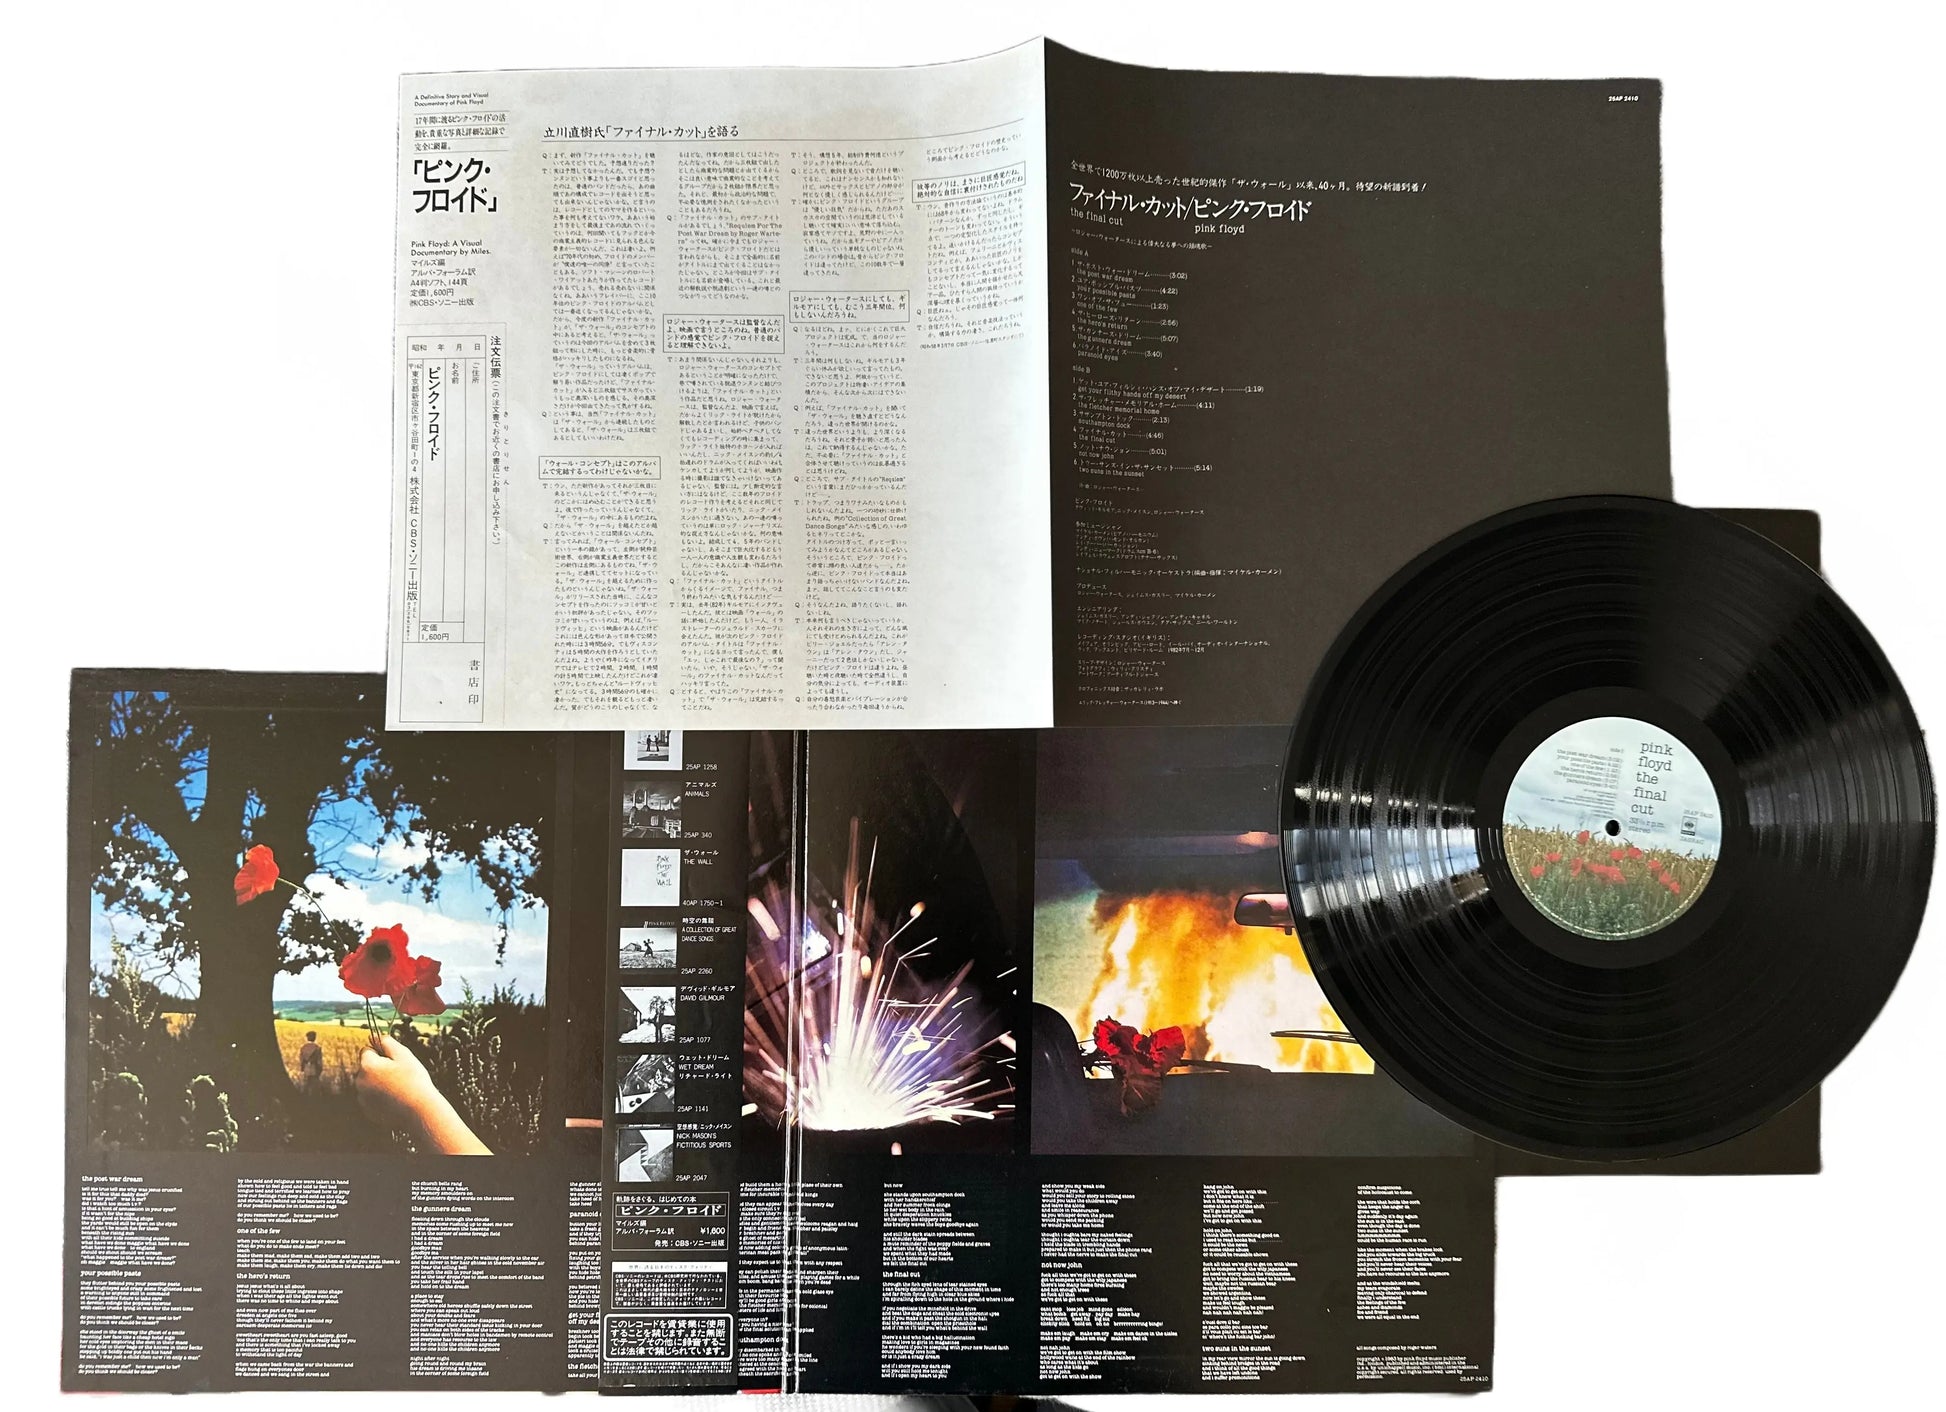 Pink Floyd - The Final Cut [Original Japanese Pressing] – Drowned Records